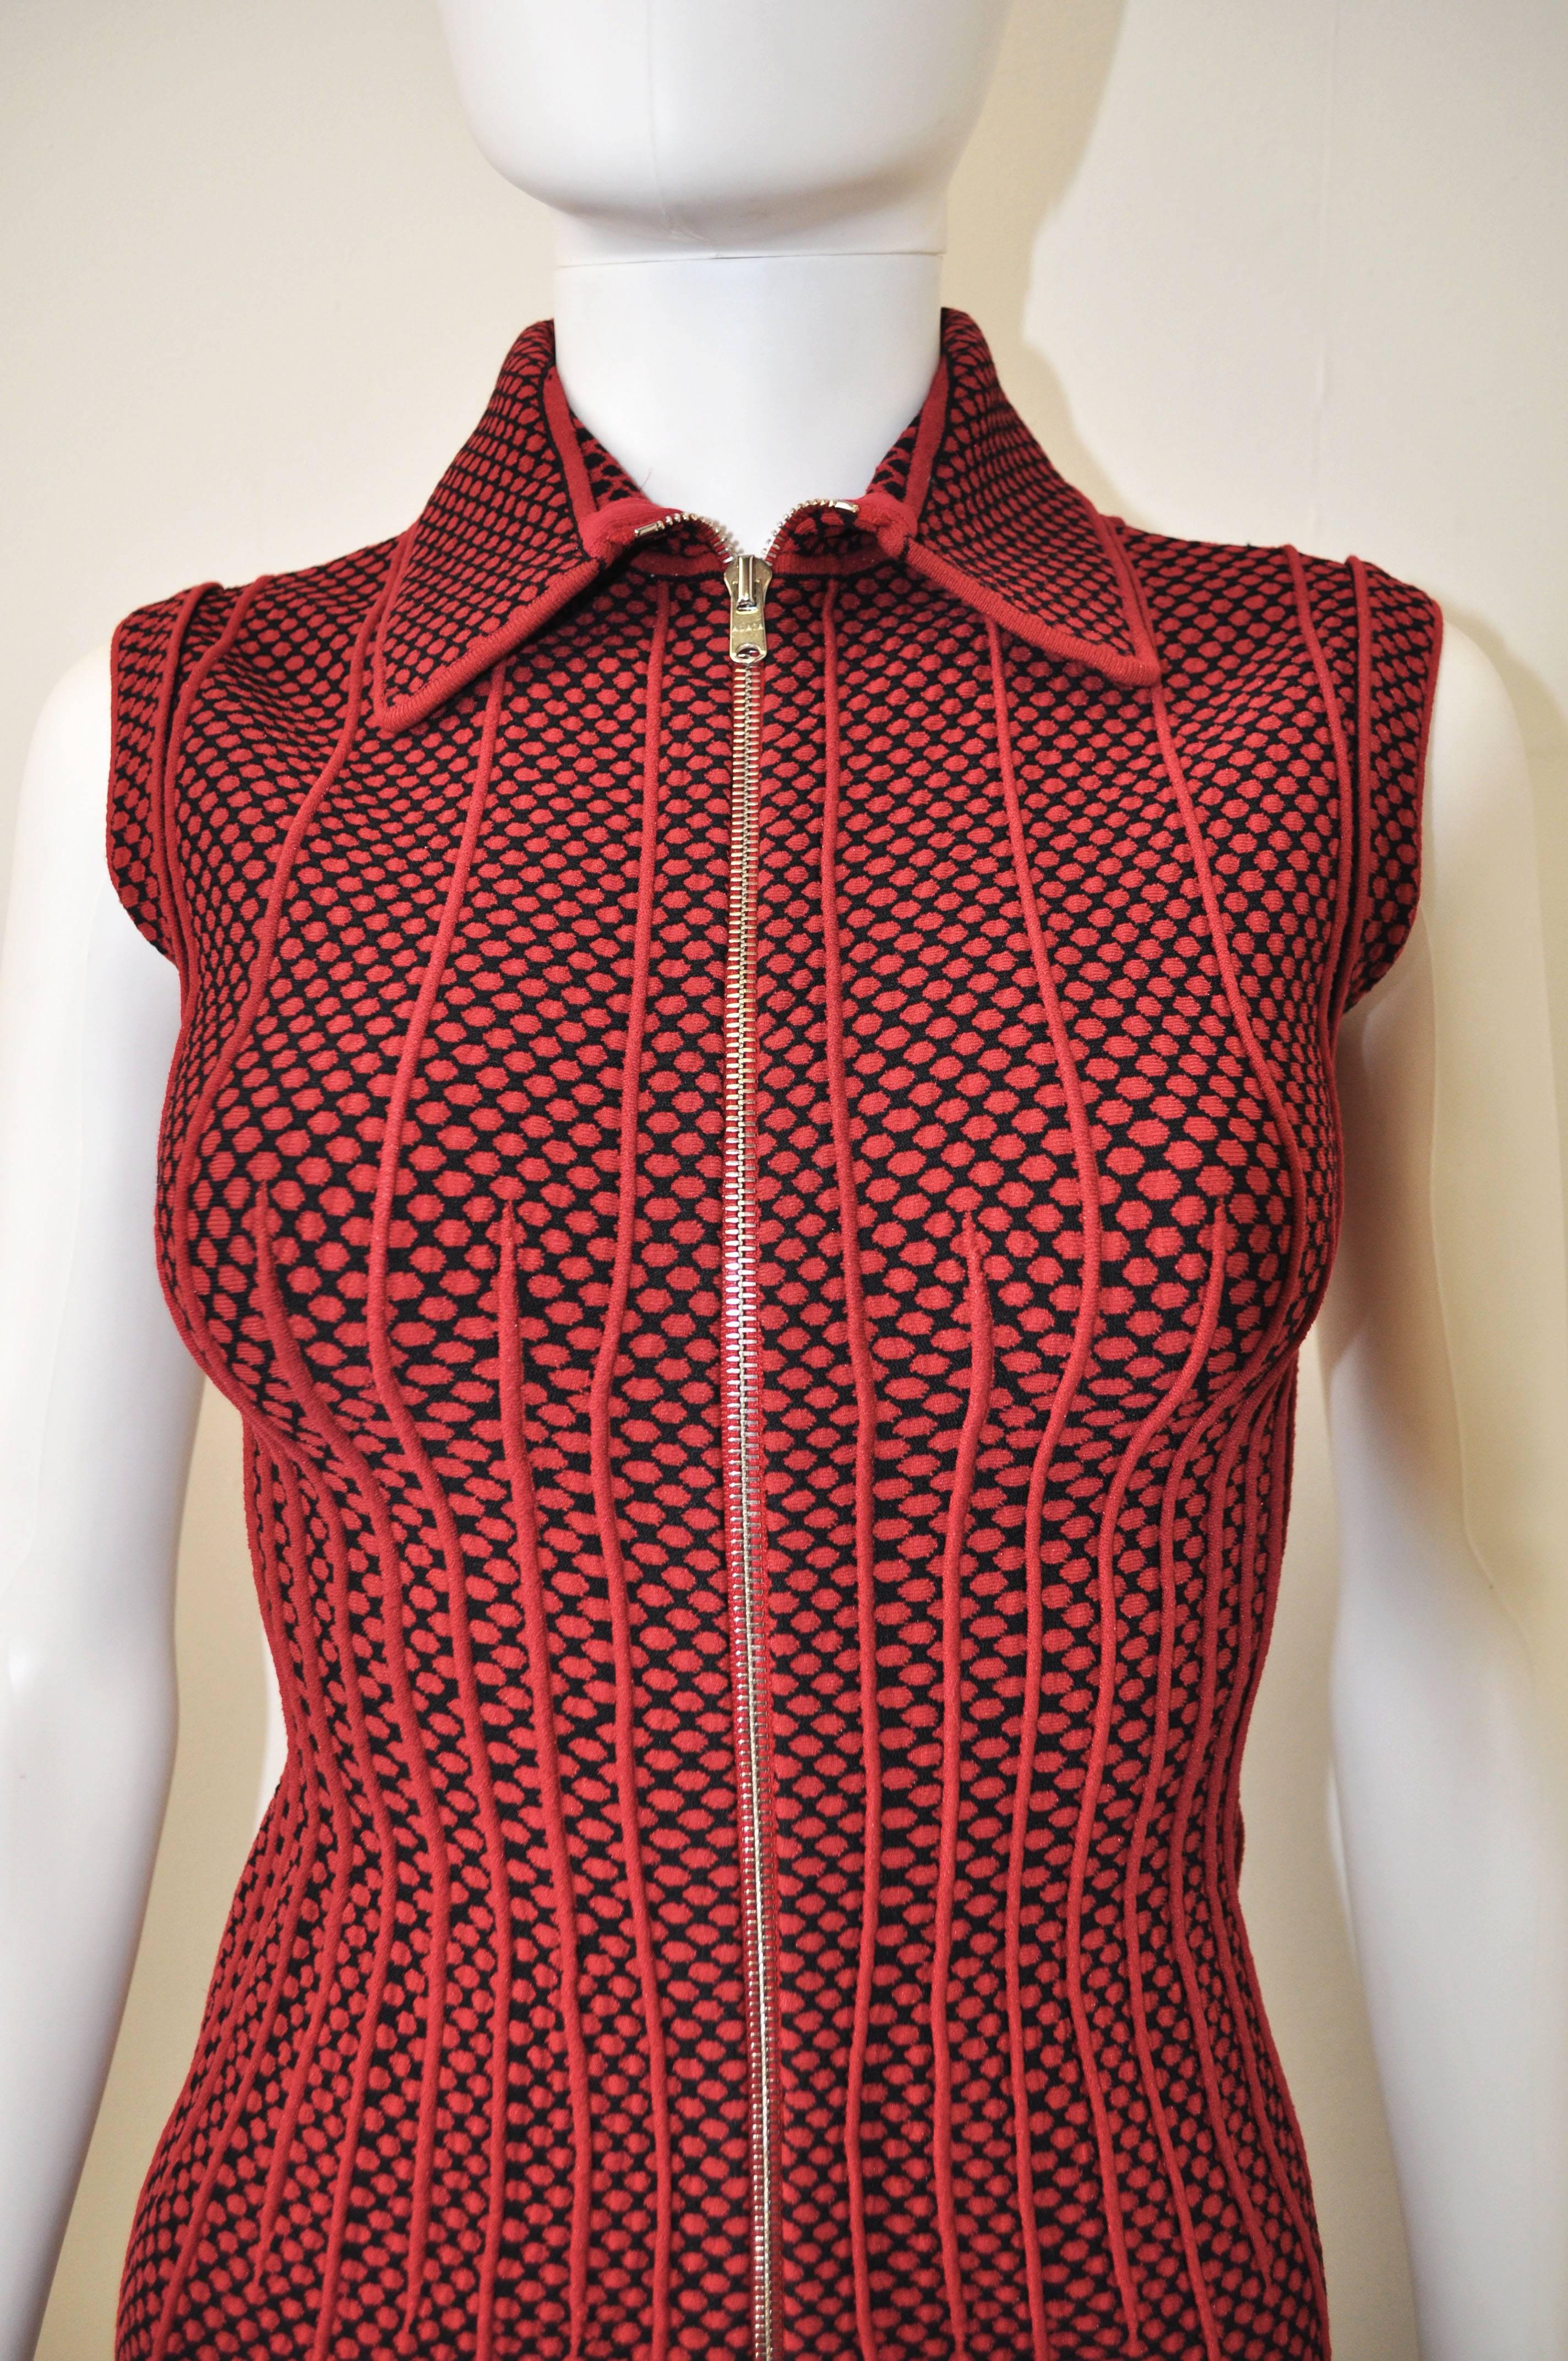 This is a very figure hugging Azzedine Alaia zip front sleeveless dress with collar. This red and black polka dot pattern dress is decorated with red piping details to accentuate the waist and length of the dress. The dress is made from Alaïa’s